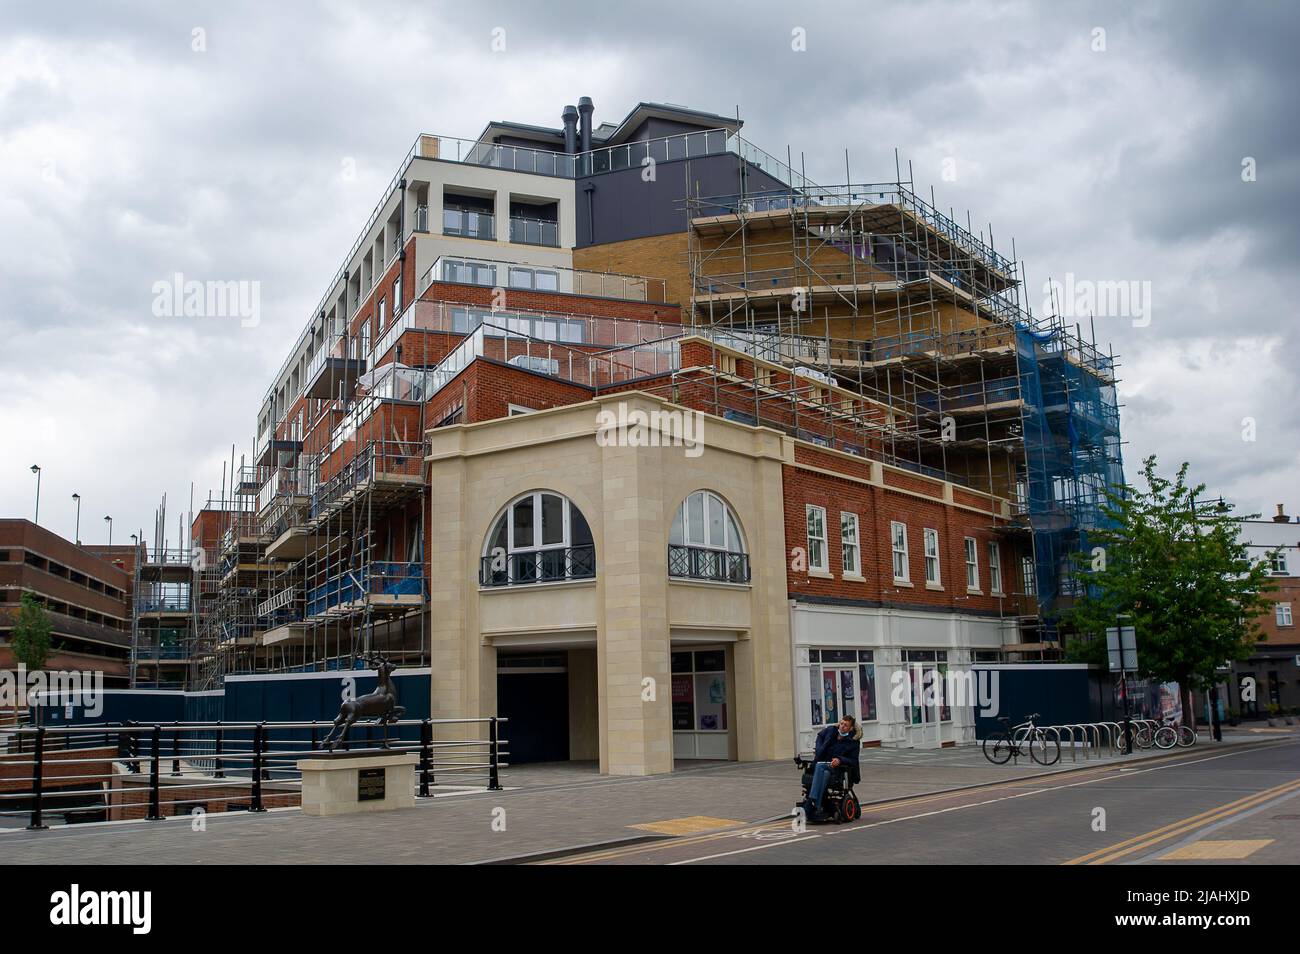 Maidenhead, Berkshire, UK. 30th May, 2022. New Michael Shanly apartments under construction. Hundreds of new apartments are being built in Maidenhead Town Centre as part of a huge regeneration project. Maidenhead is now on the Elizabeth Line and property prices are increasing as a result. Credit: Maureen McLean/Alamy Stock Photo